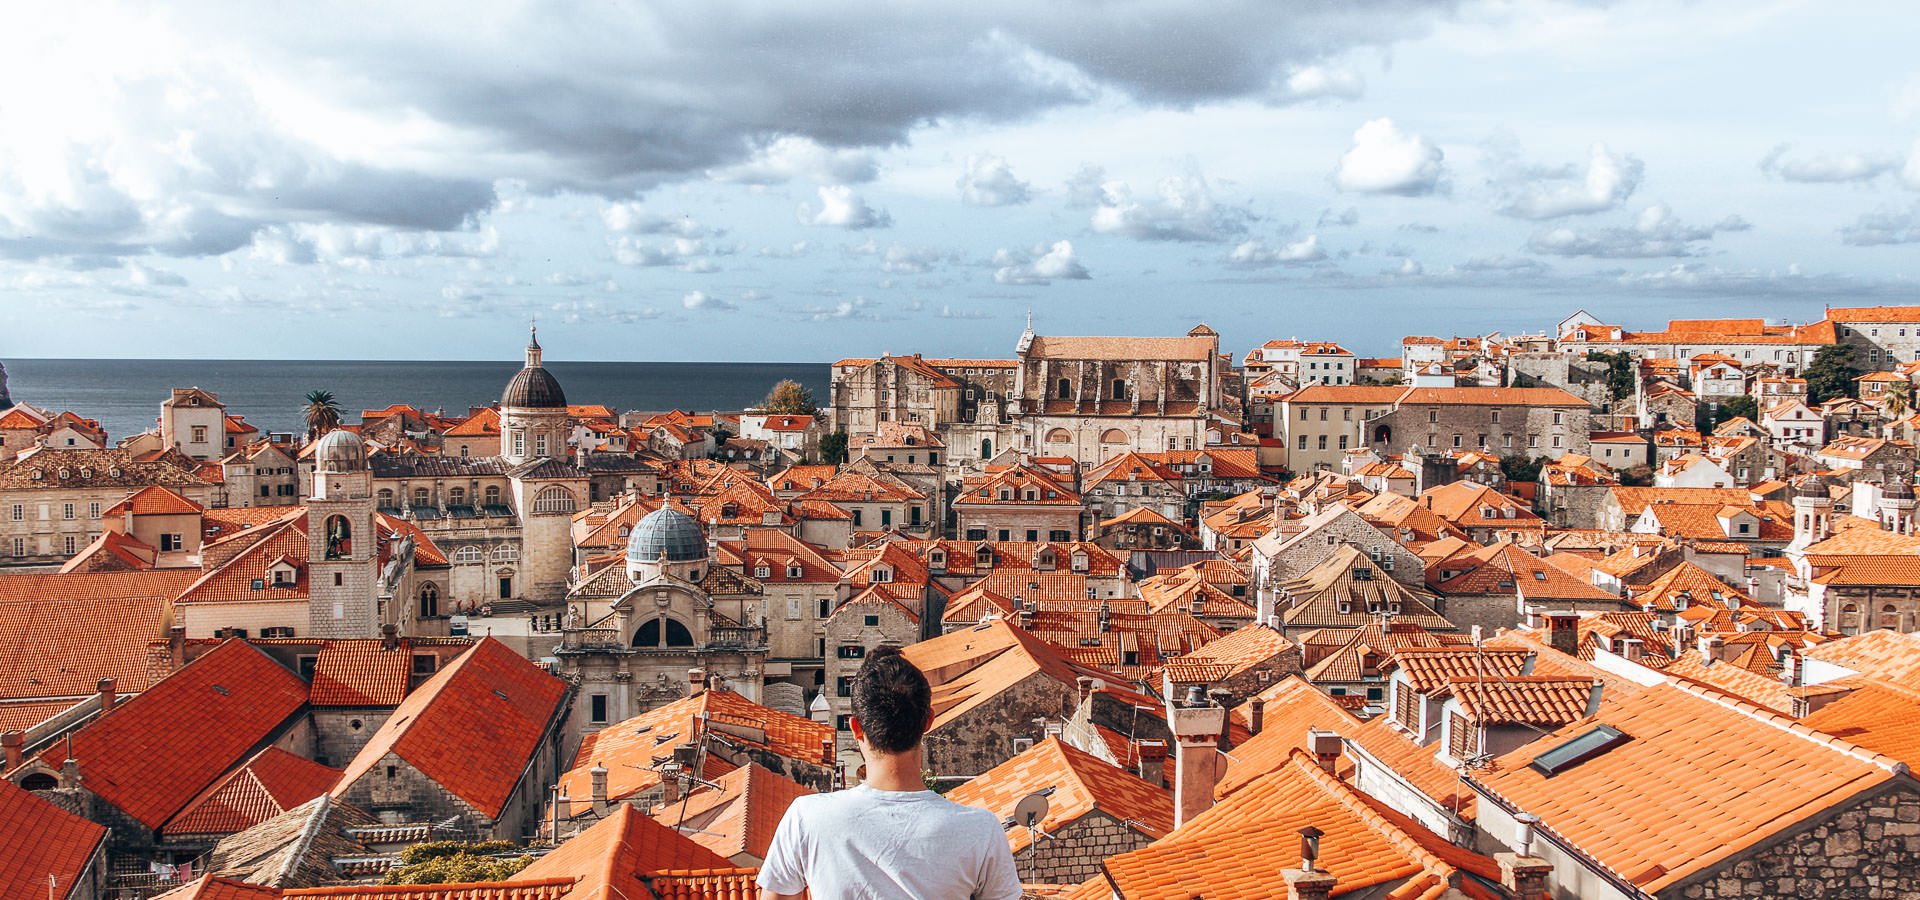 How To Spend 48 Hours In Dubrovnik | 3 days in lisbon 2